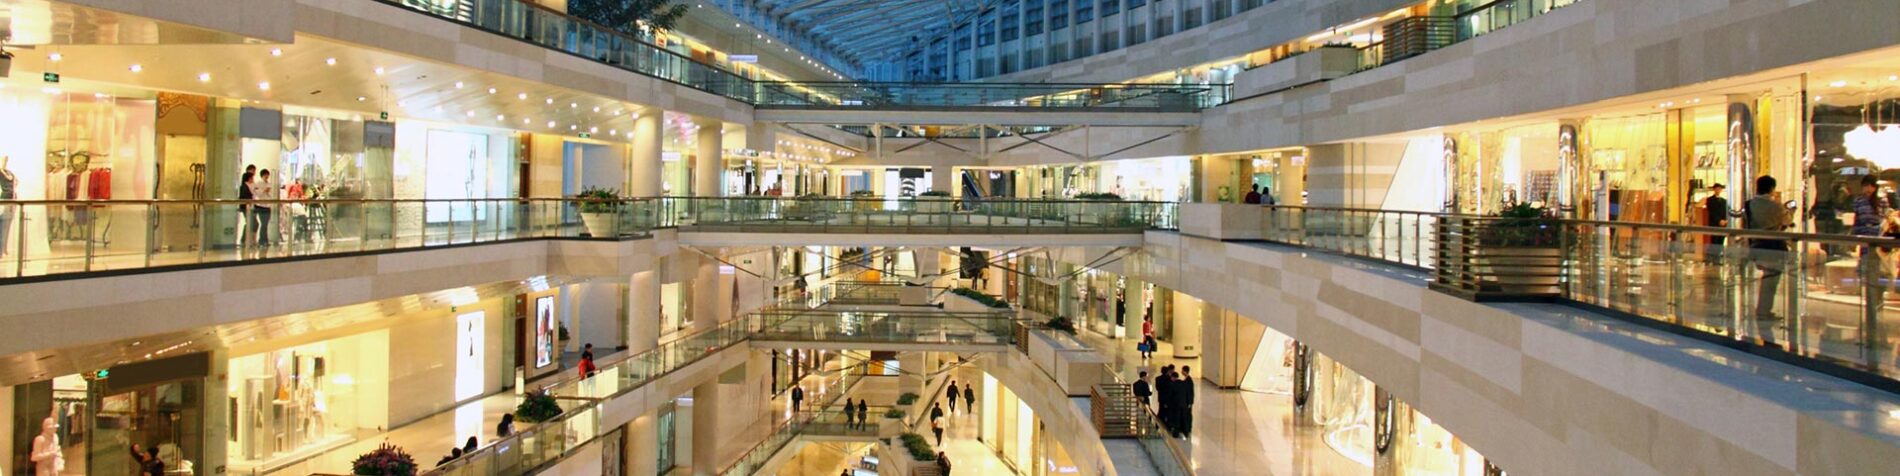 How to Revive the Mall Experience for the Digital Generation